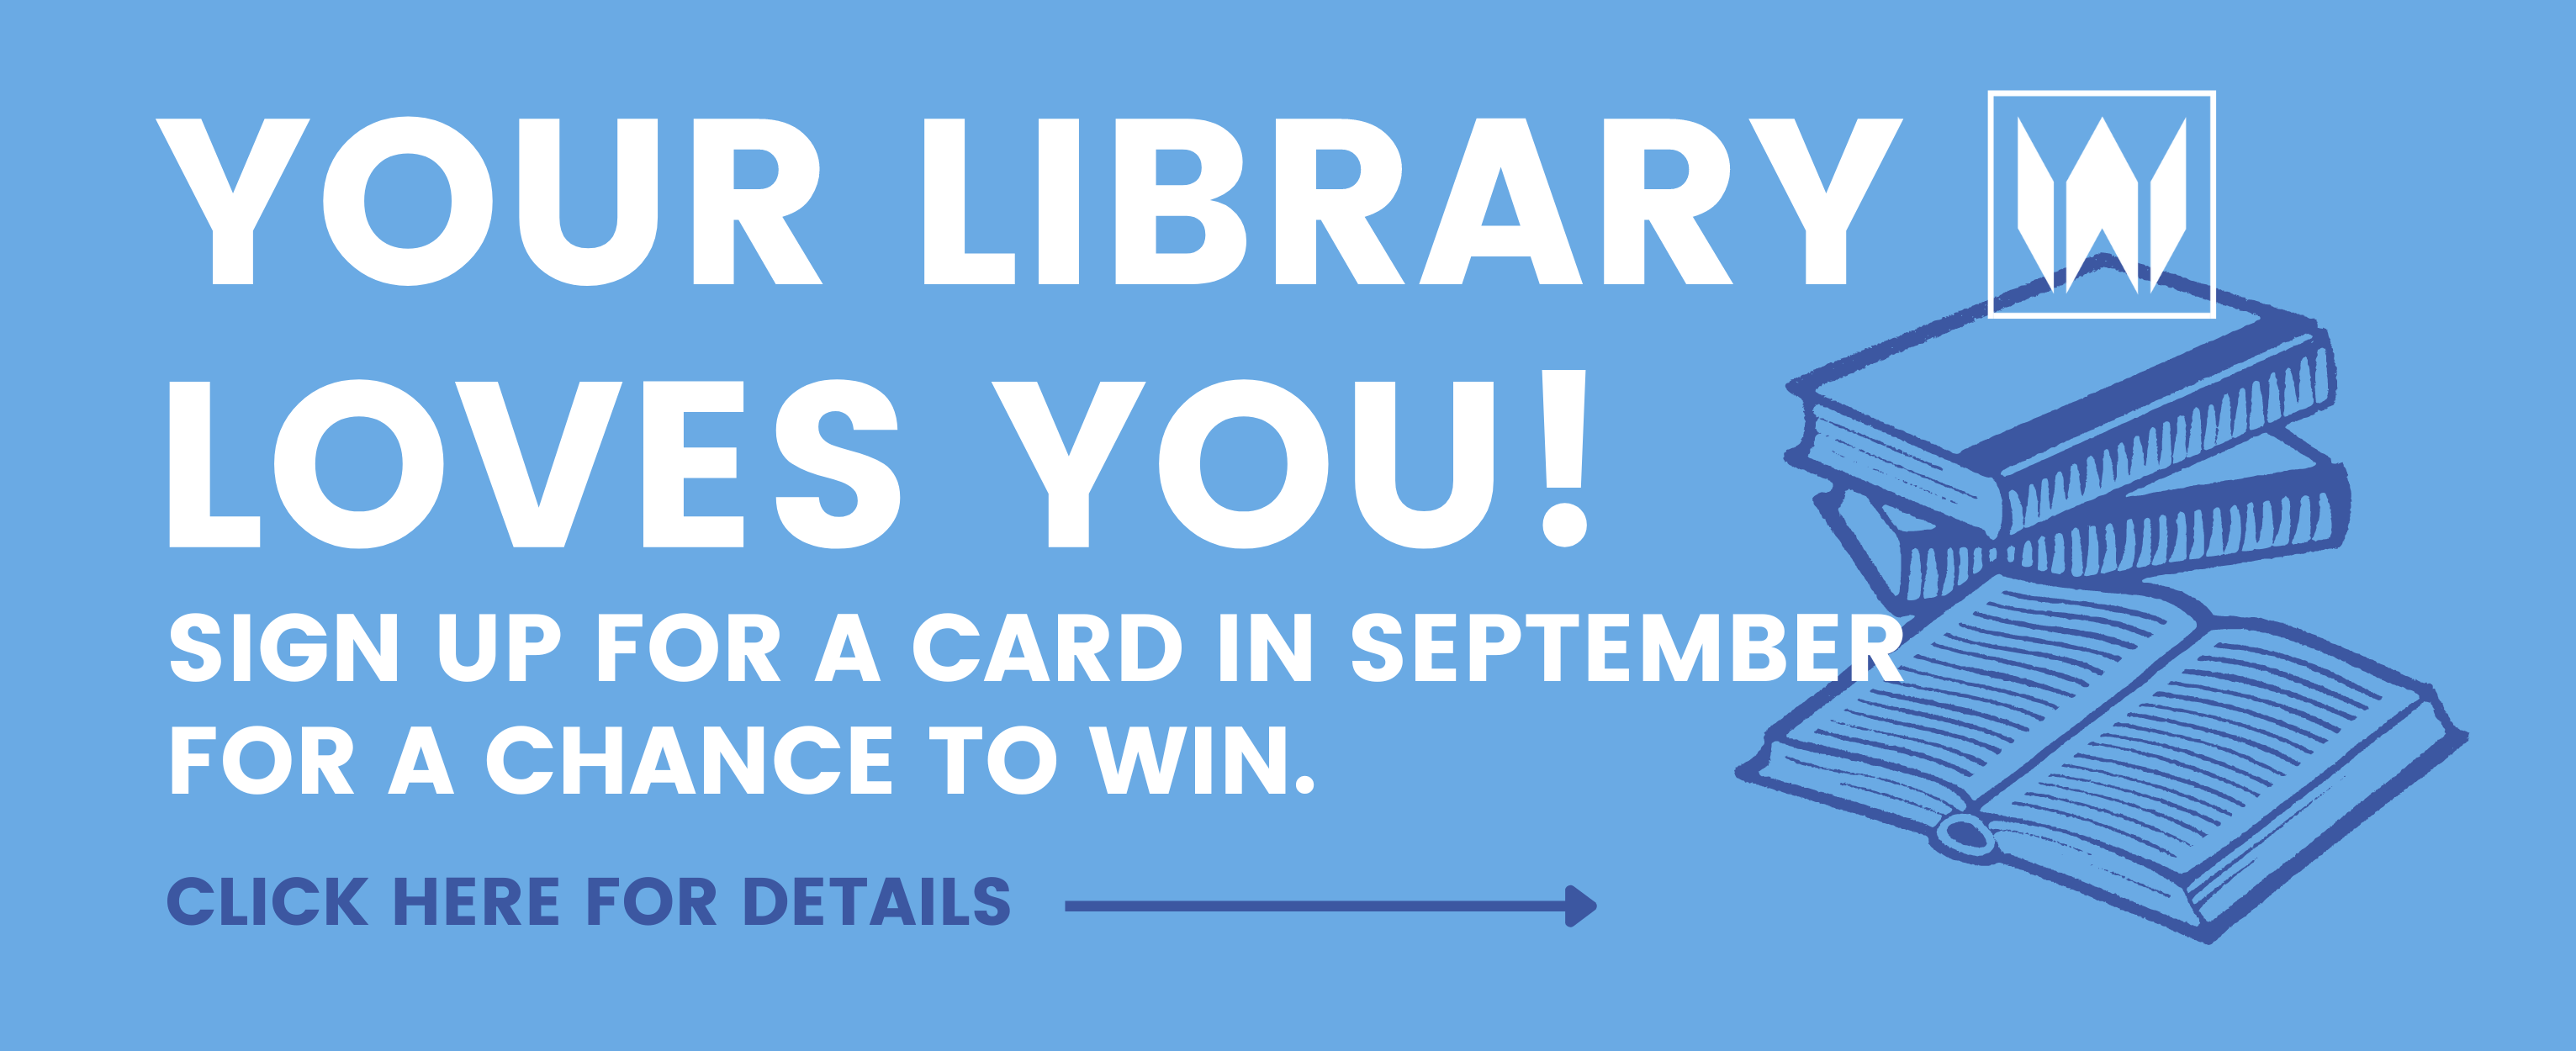 Sign-up for a library card with WCL this September and be entered for a chance to win a gift card to the local business of your choosing. Click here for details.